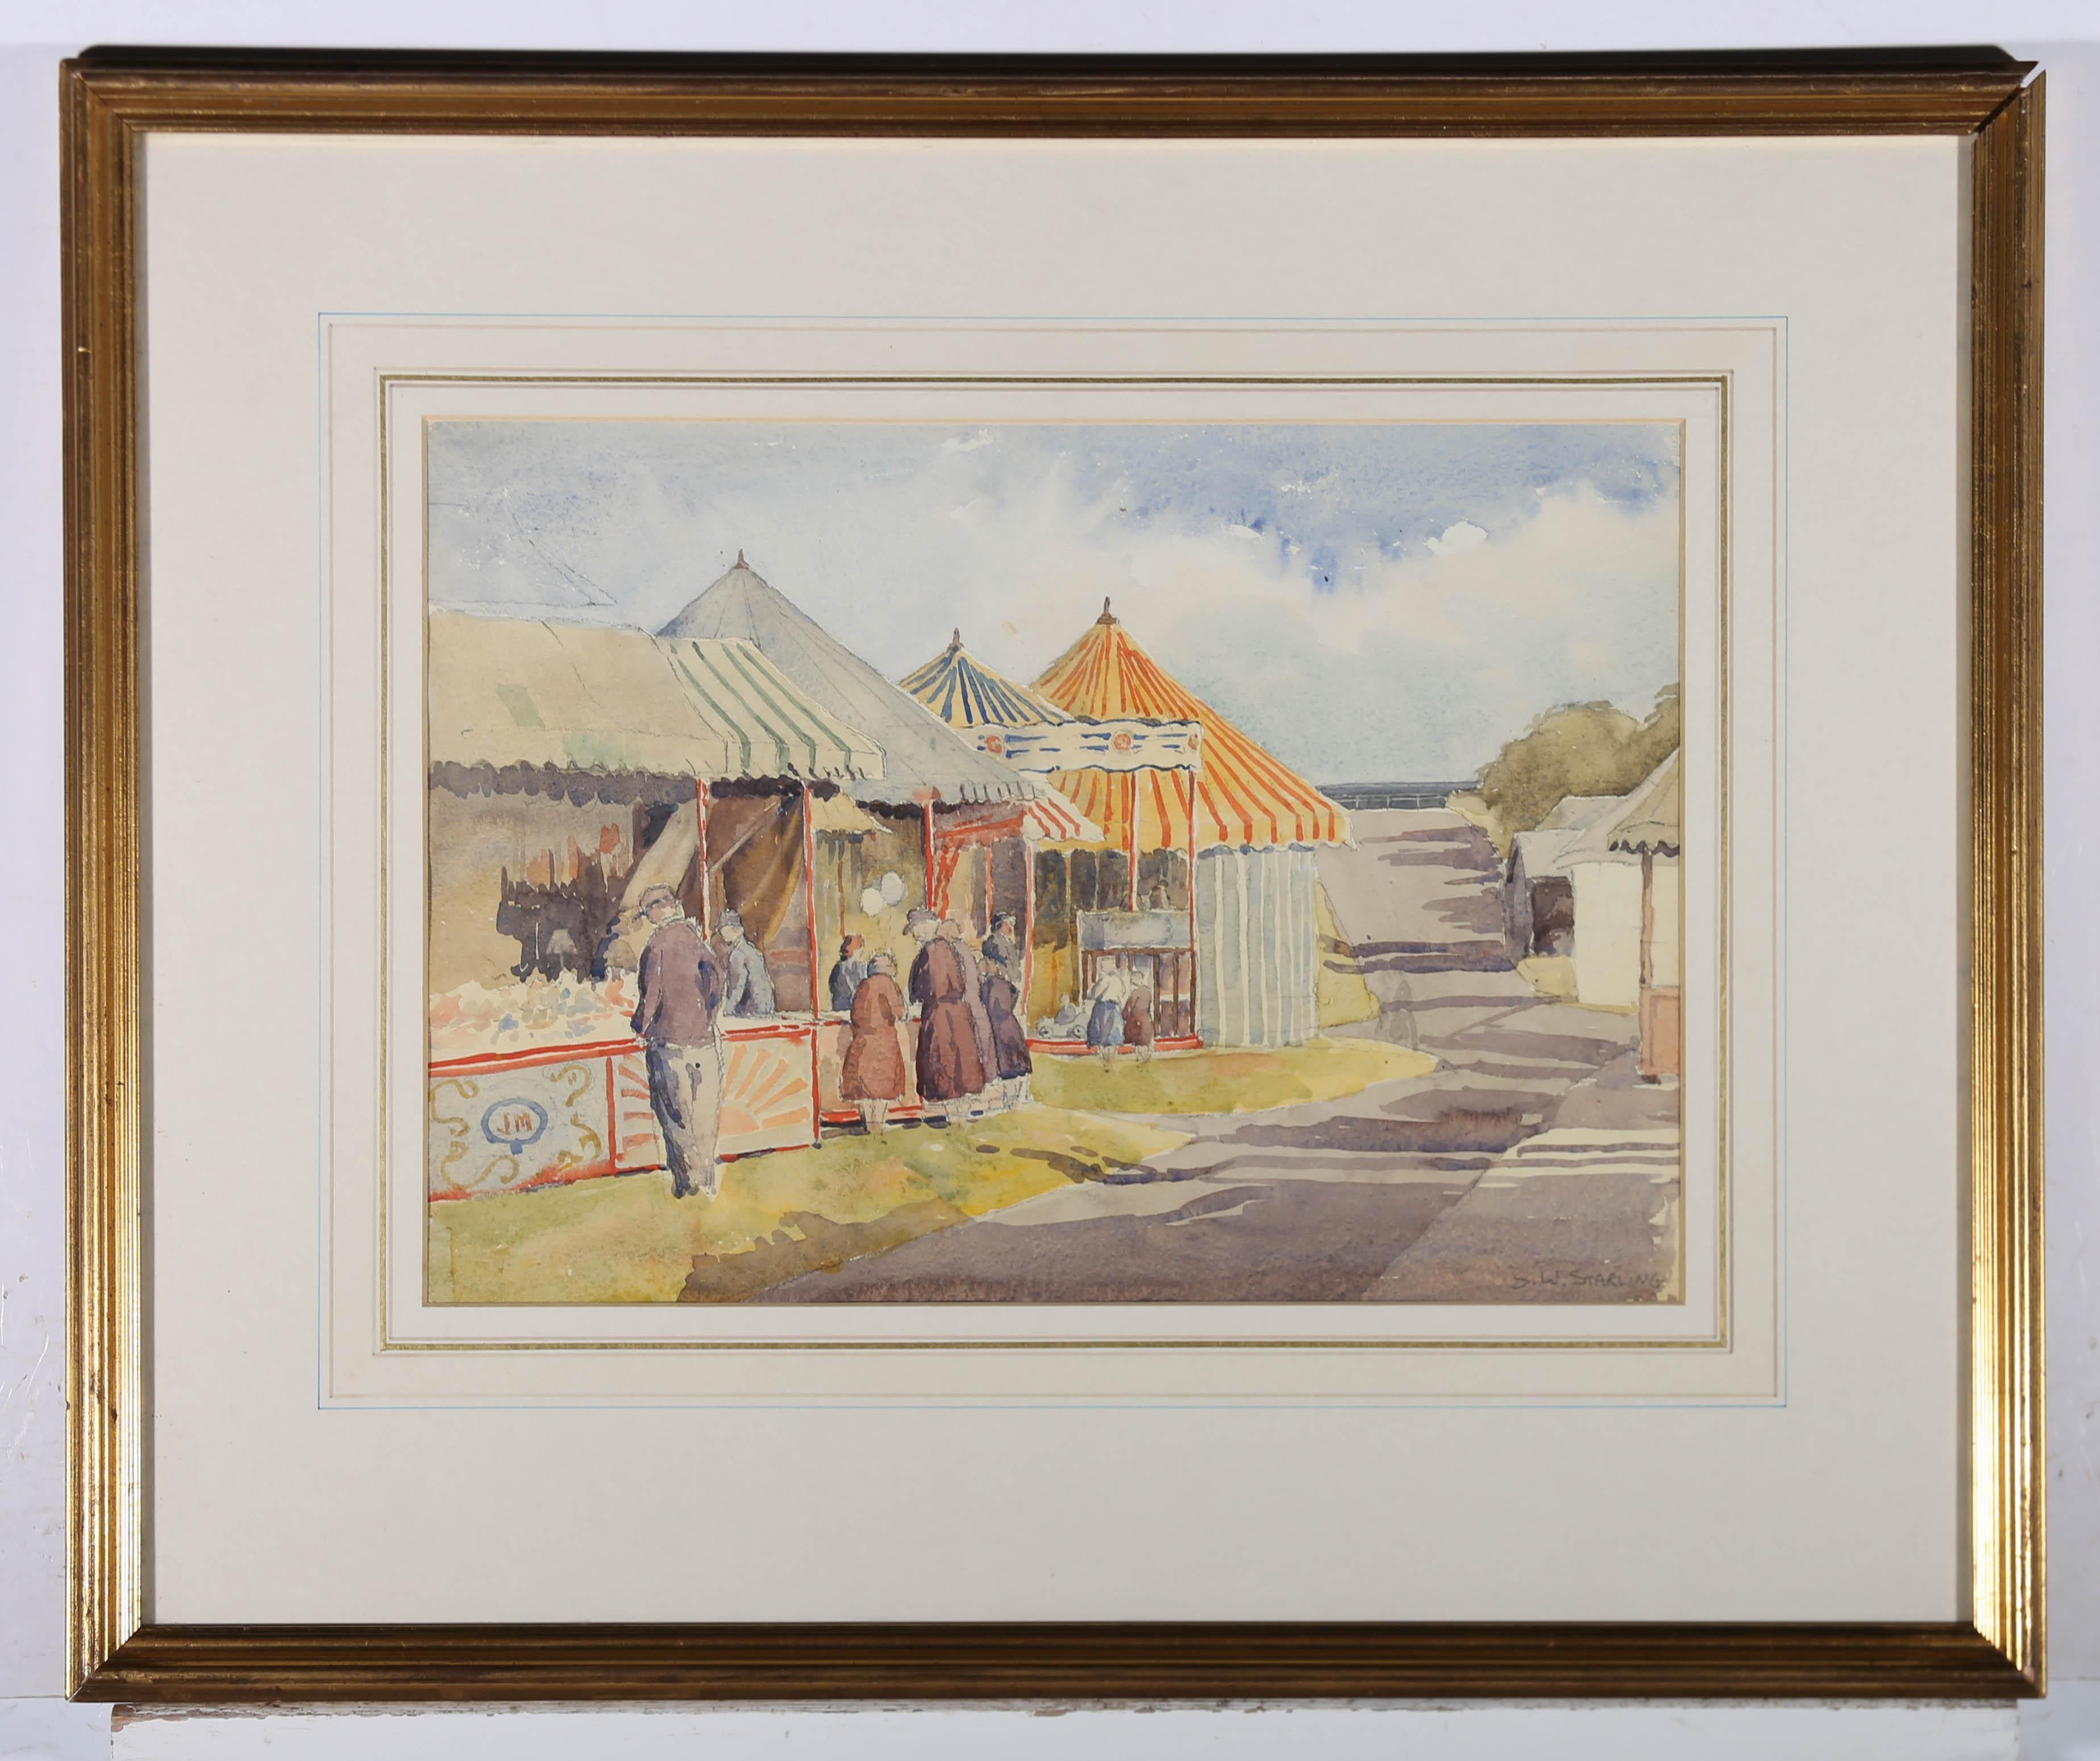 Sydney W. Starling (1889-1984) - 1930 Watercolour, The Fair at Worthing For Sale 3